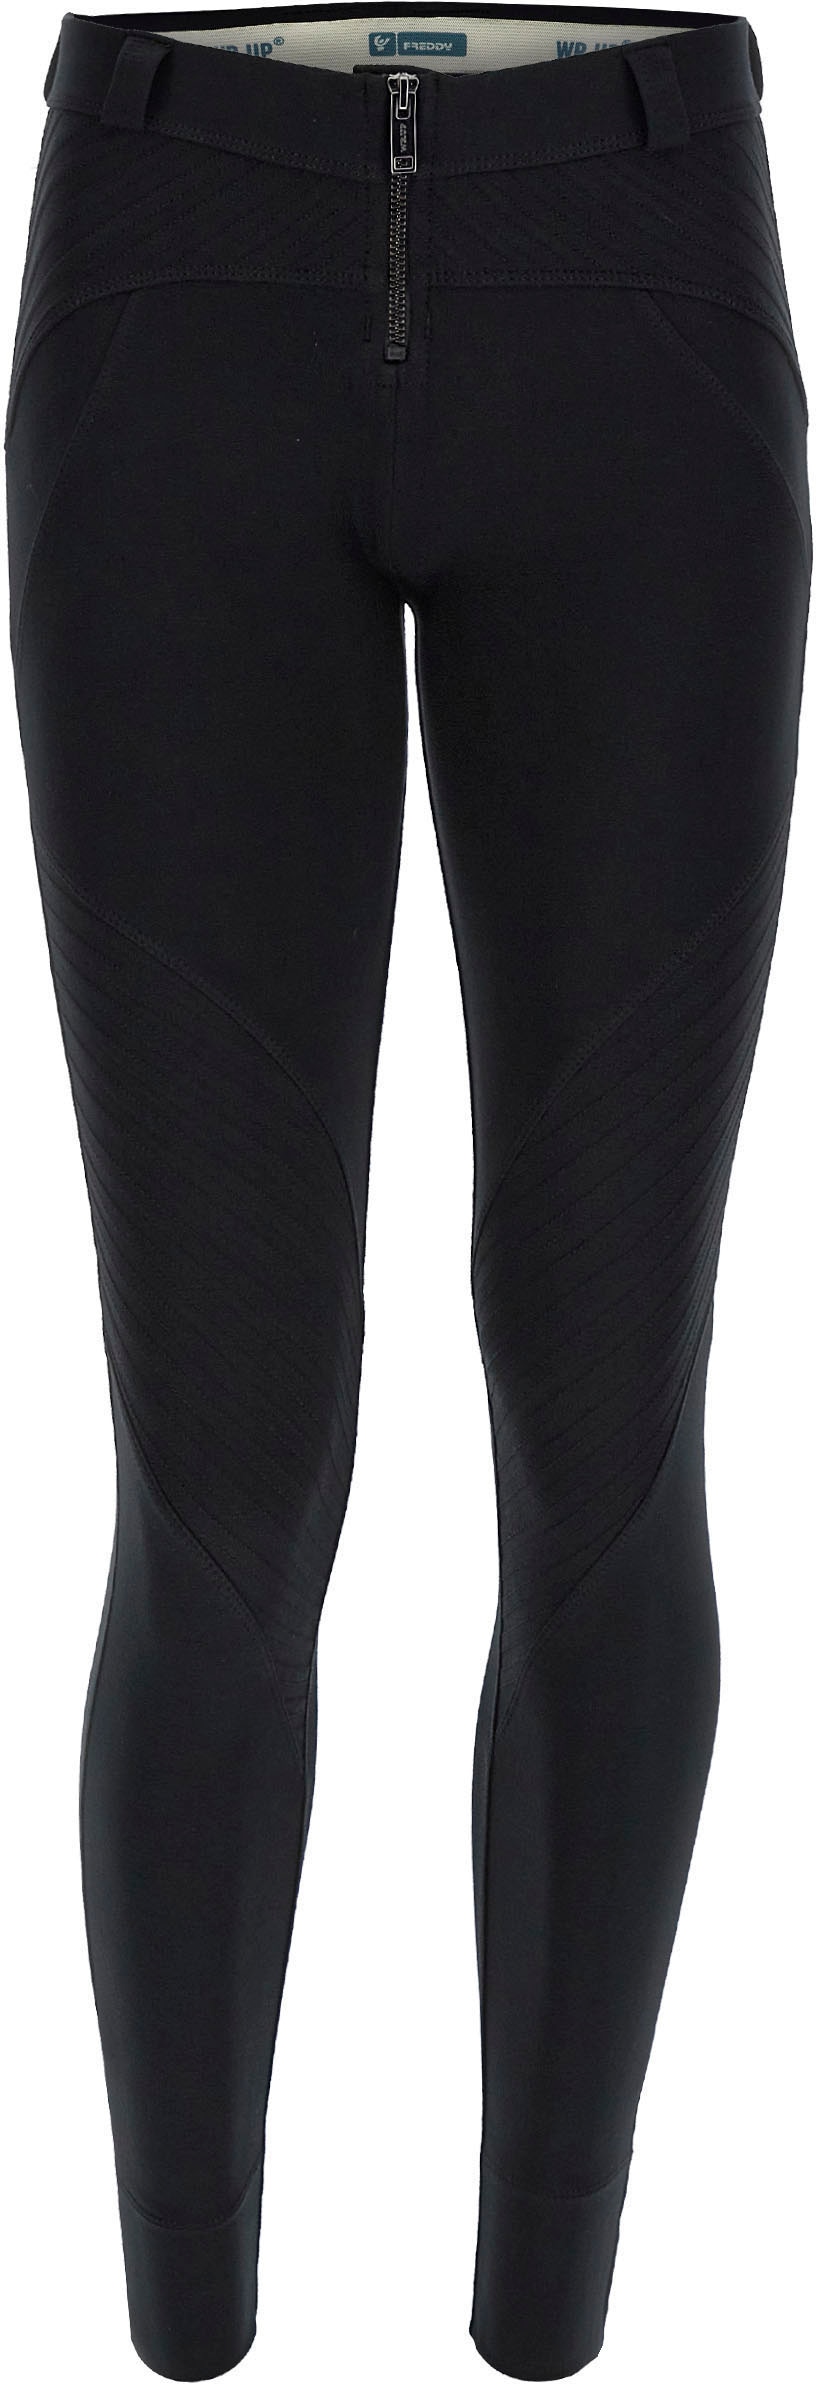 Freddy Jeggings »WRUP2 SUPERSKINNY«, mit Shaping Effekt bei & Lifting OTTOversand